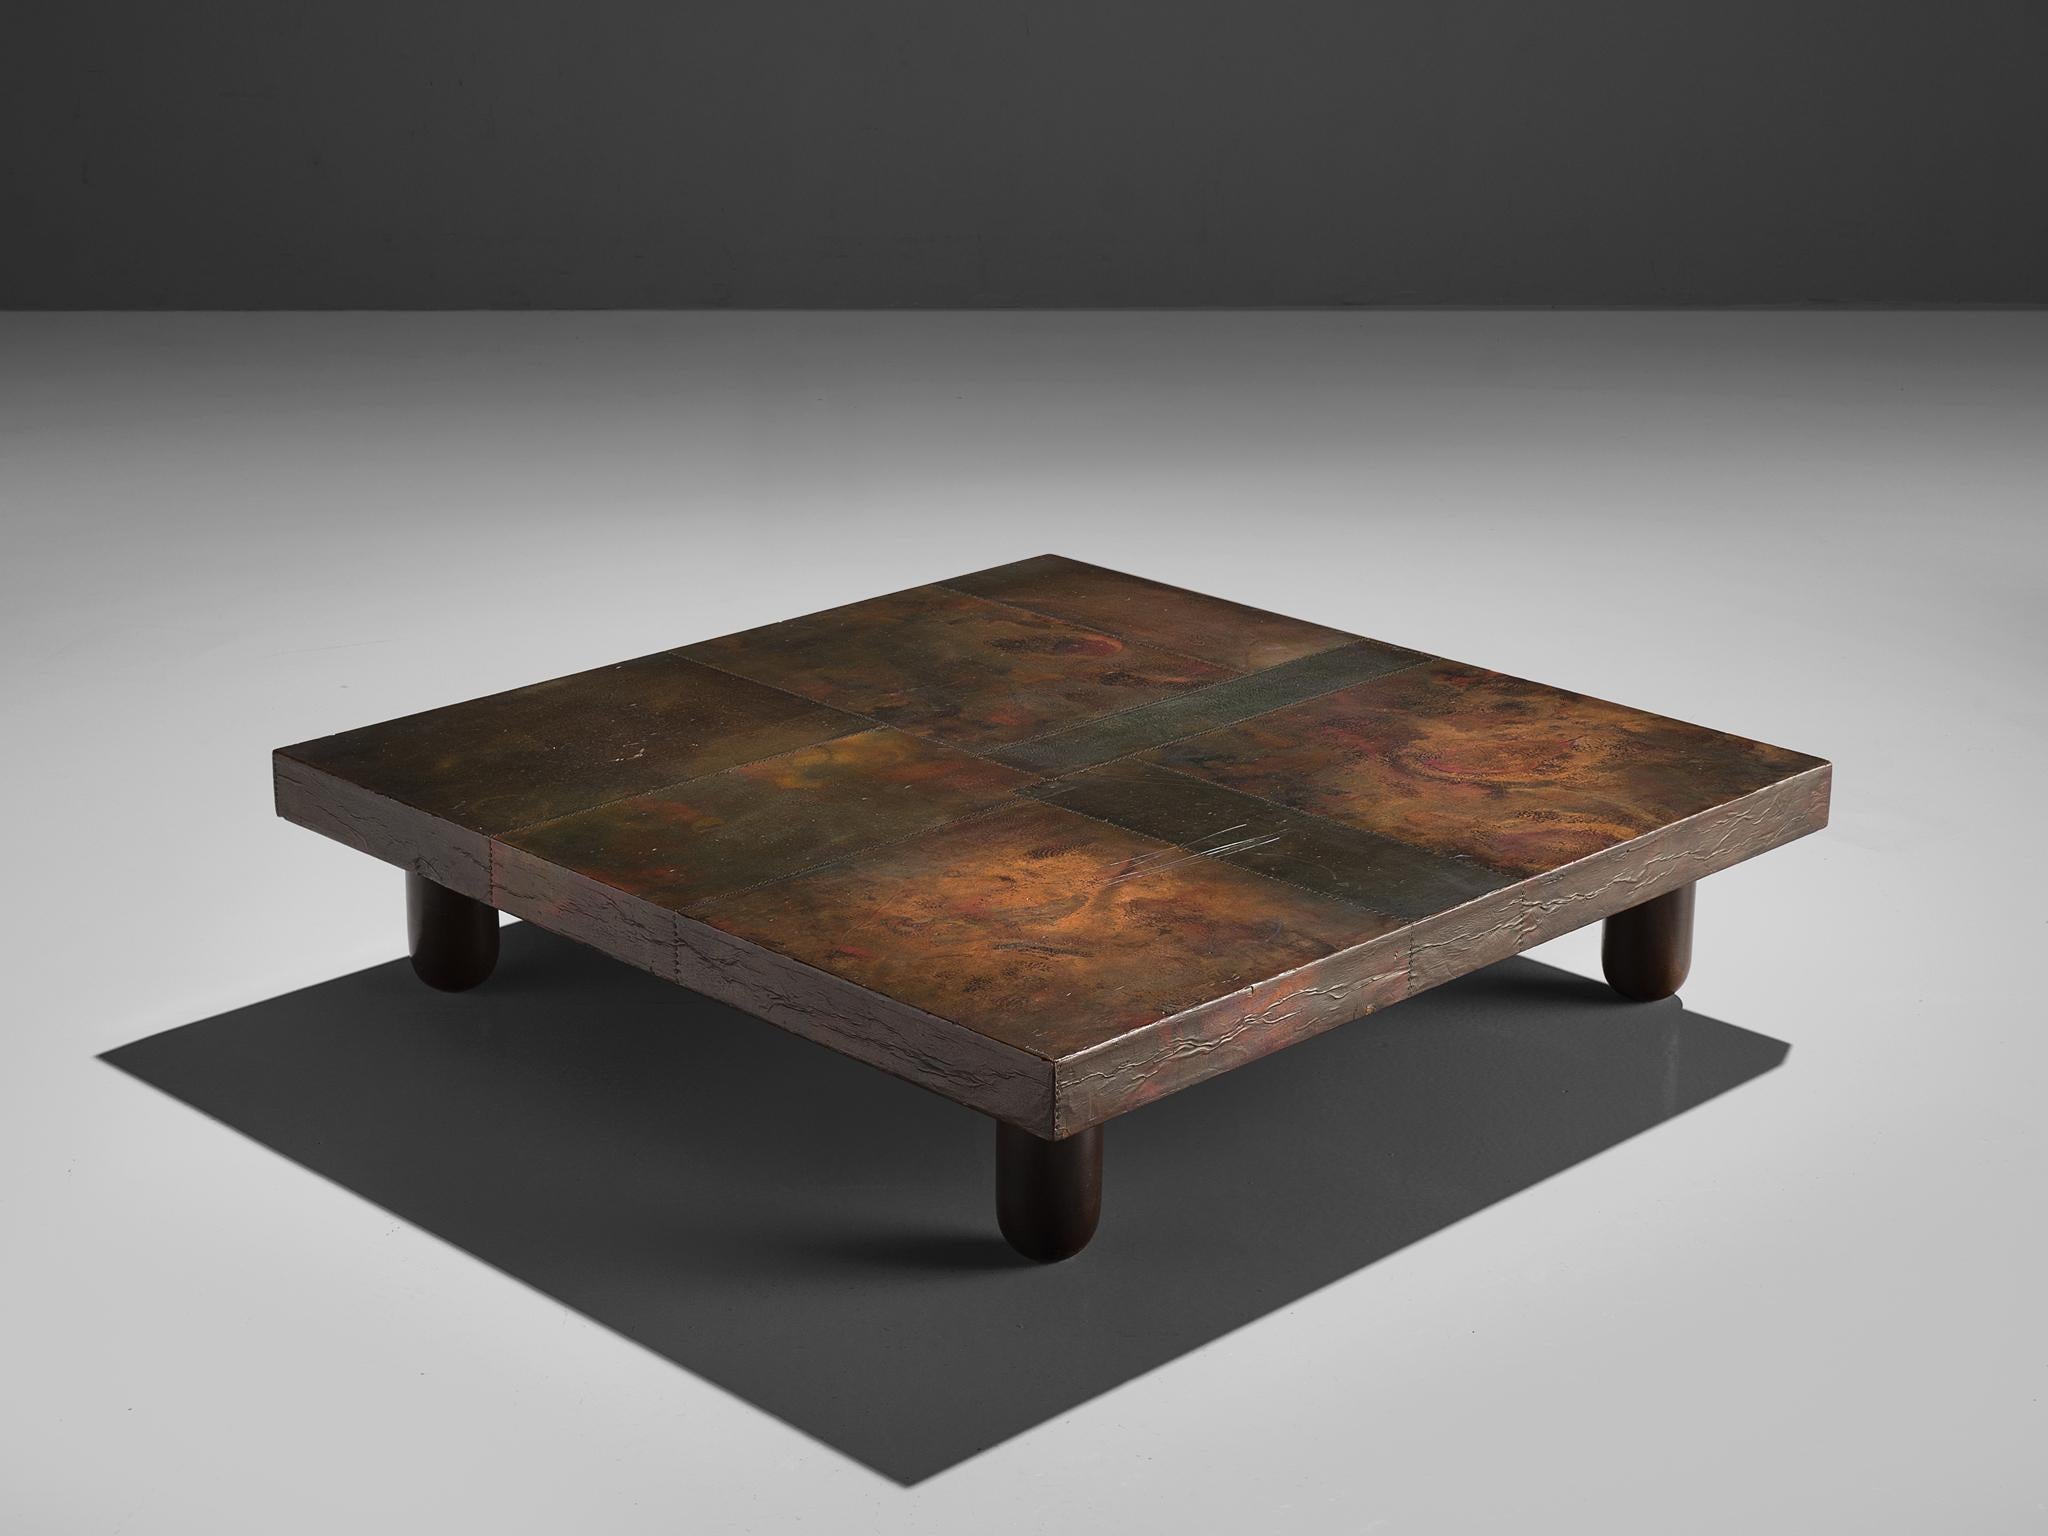 Atelier Burchiellaro, coffee table, copper, wood, Italy, 1960s 

Atelier Burchiellaro and its founder Lorenzo Burchiellaro are known for its artistic use in metals and the creation of decorative objects and furniture. This side table is no